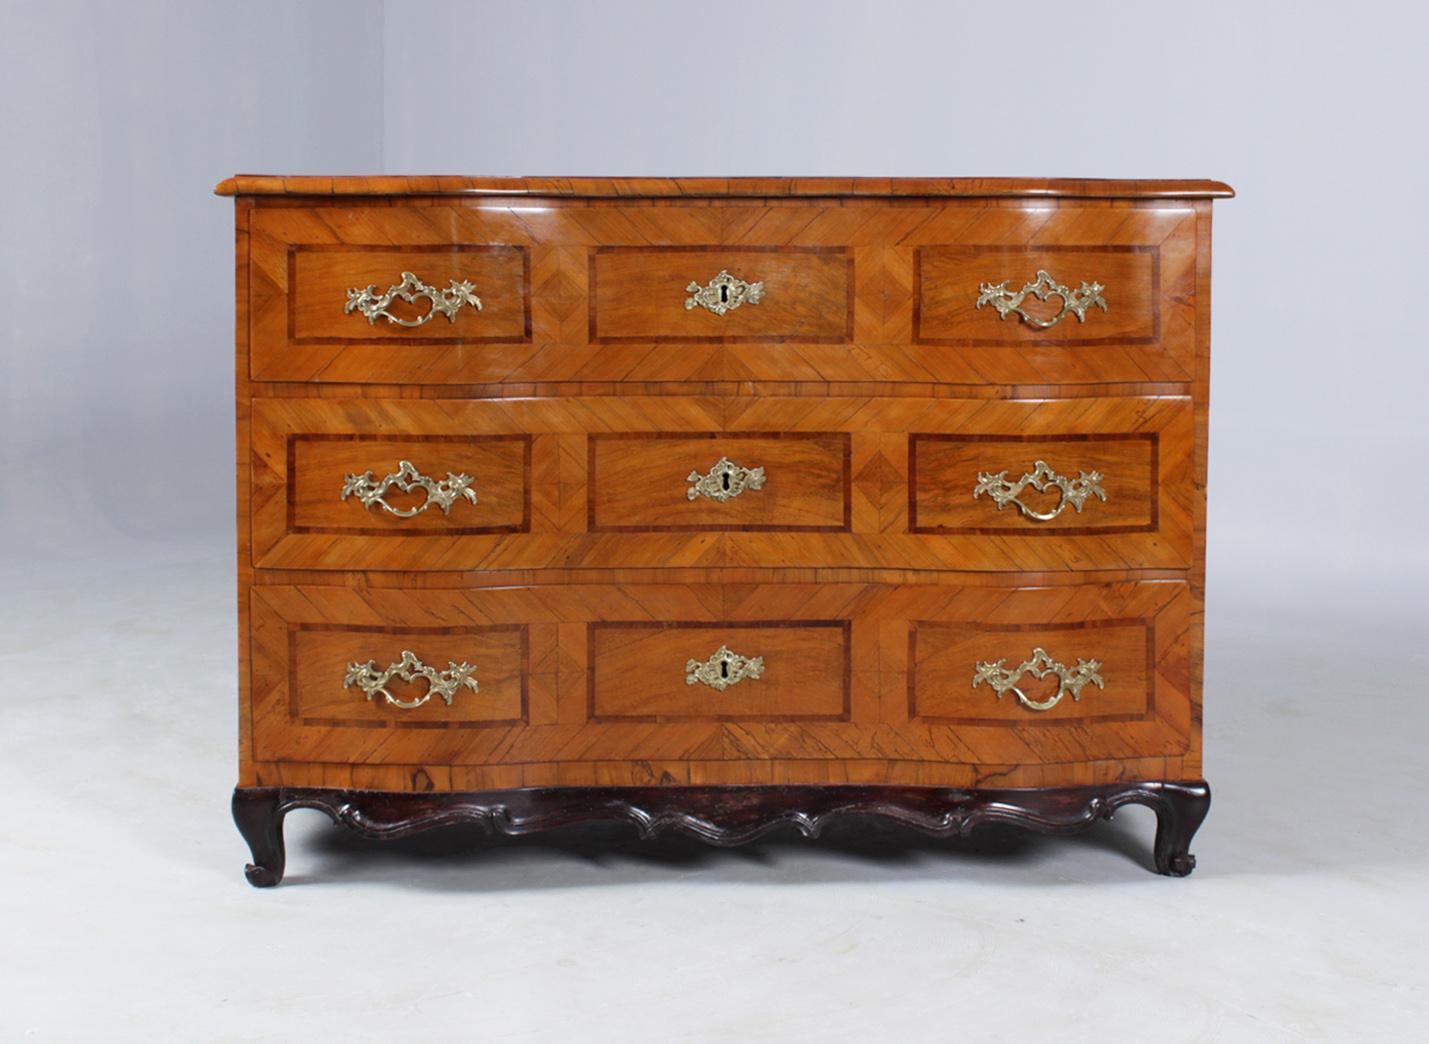 Dimensions: H x W x D: 86 x 123 x 70 cm.

Antique chest of drawers in walnut veneer with banded plum inlays. Three large lockable drawers with brass handles and fittings.

The chest of drawers was made in the Mainz region. Typical for the time